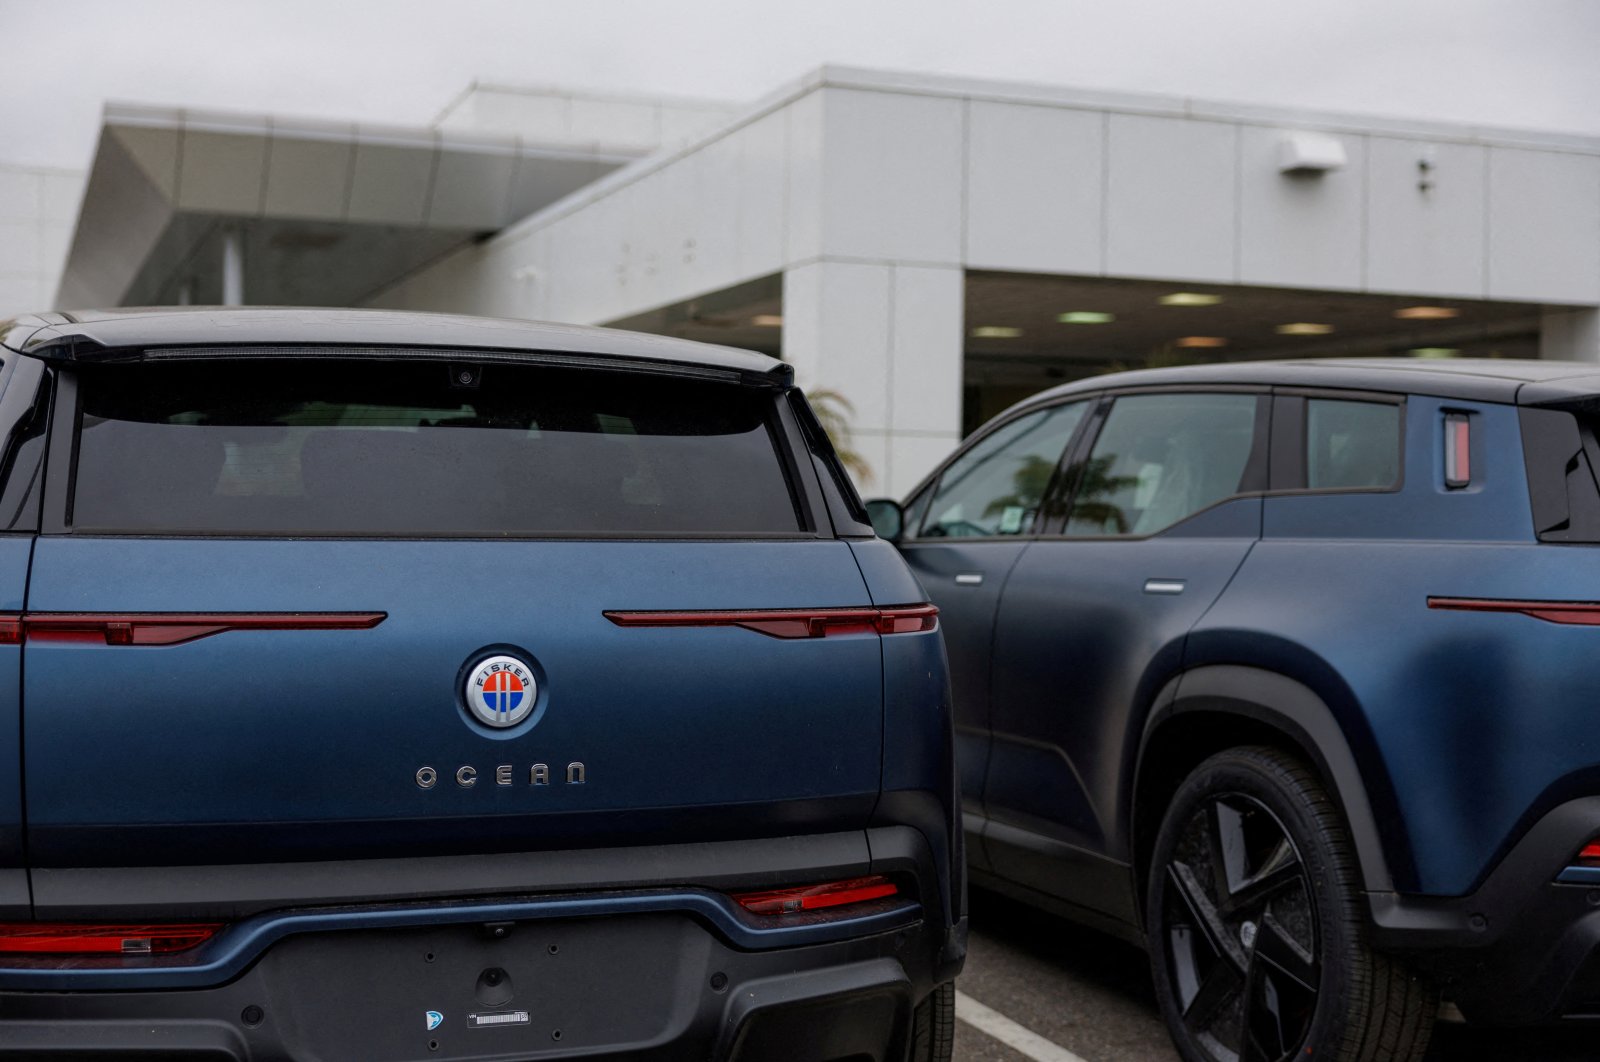 Fisker Ocean electric SUV vehicles are shown at one of the company’s sales, service and delivery centers, Vista, California, U.S., May 22, 2024. (Reuters Photo)